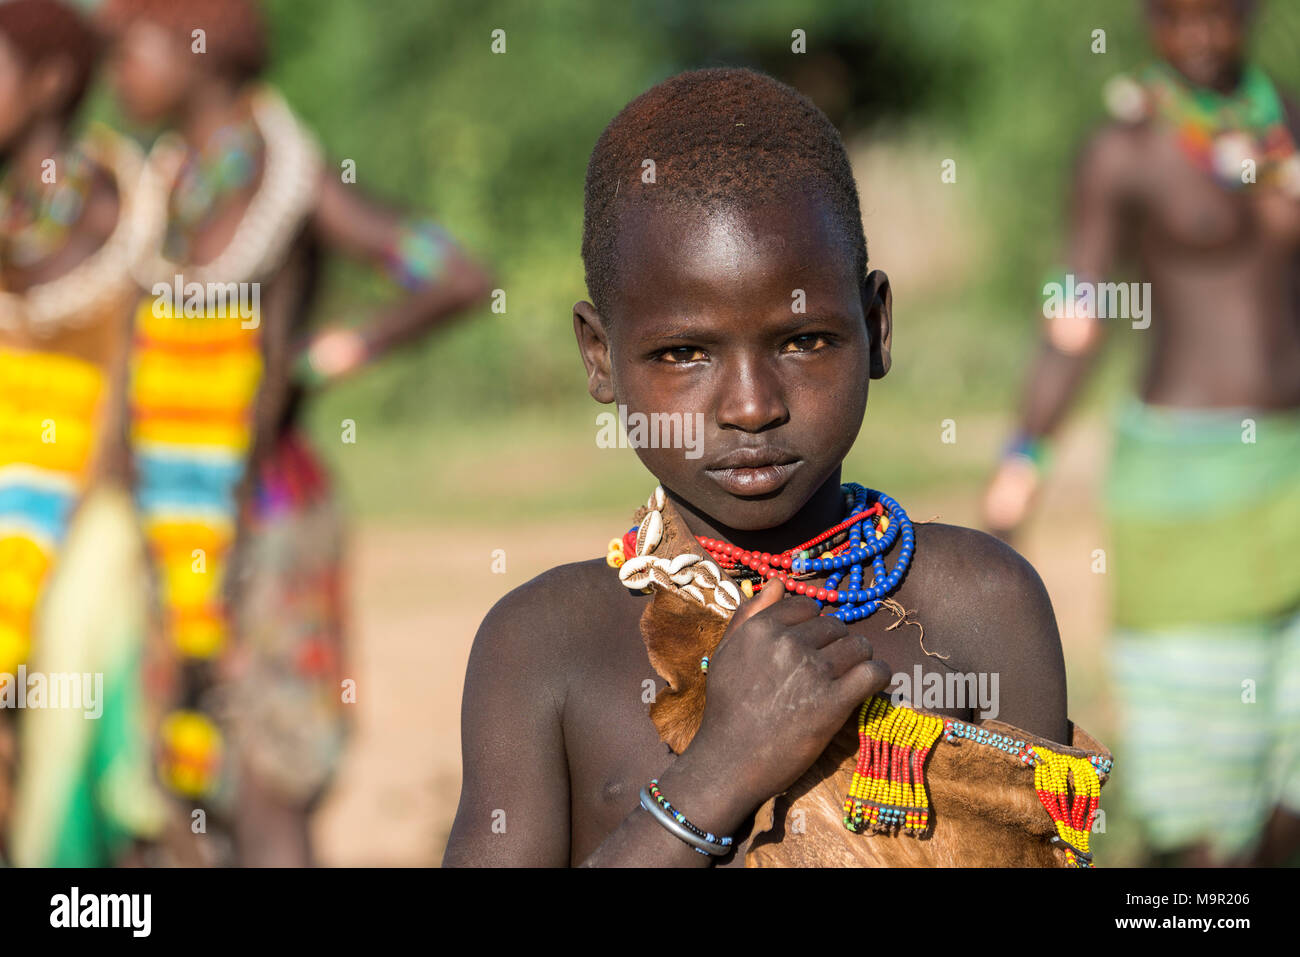 Young girl, portrait, Hamer tribe, Turmi market, Southern Nations Nationalities and Peoples' Region, Ethiopia Stock Photo